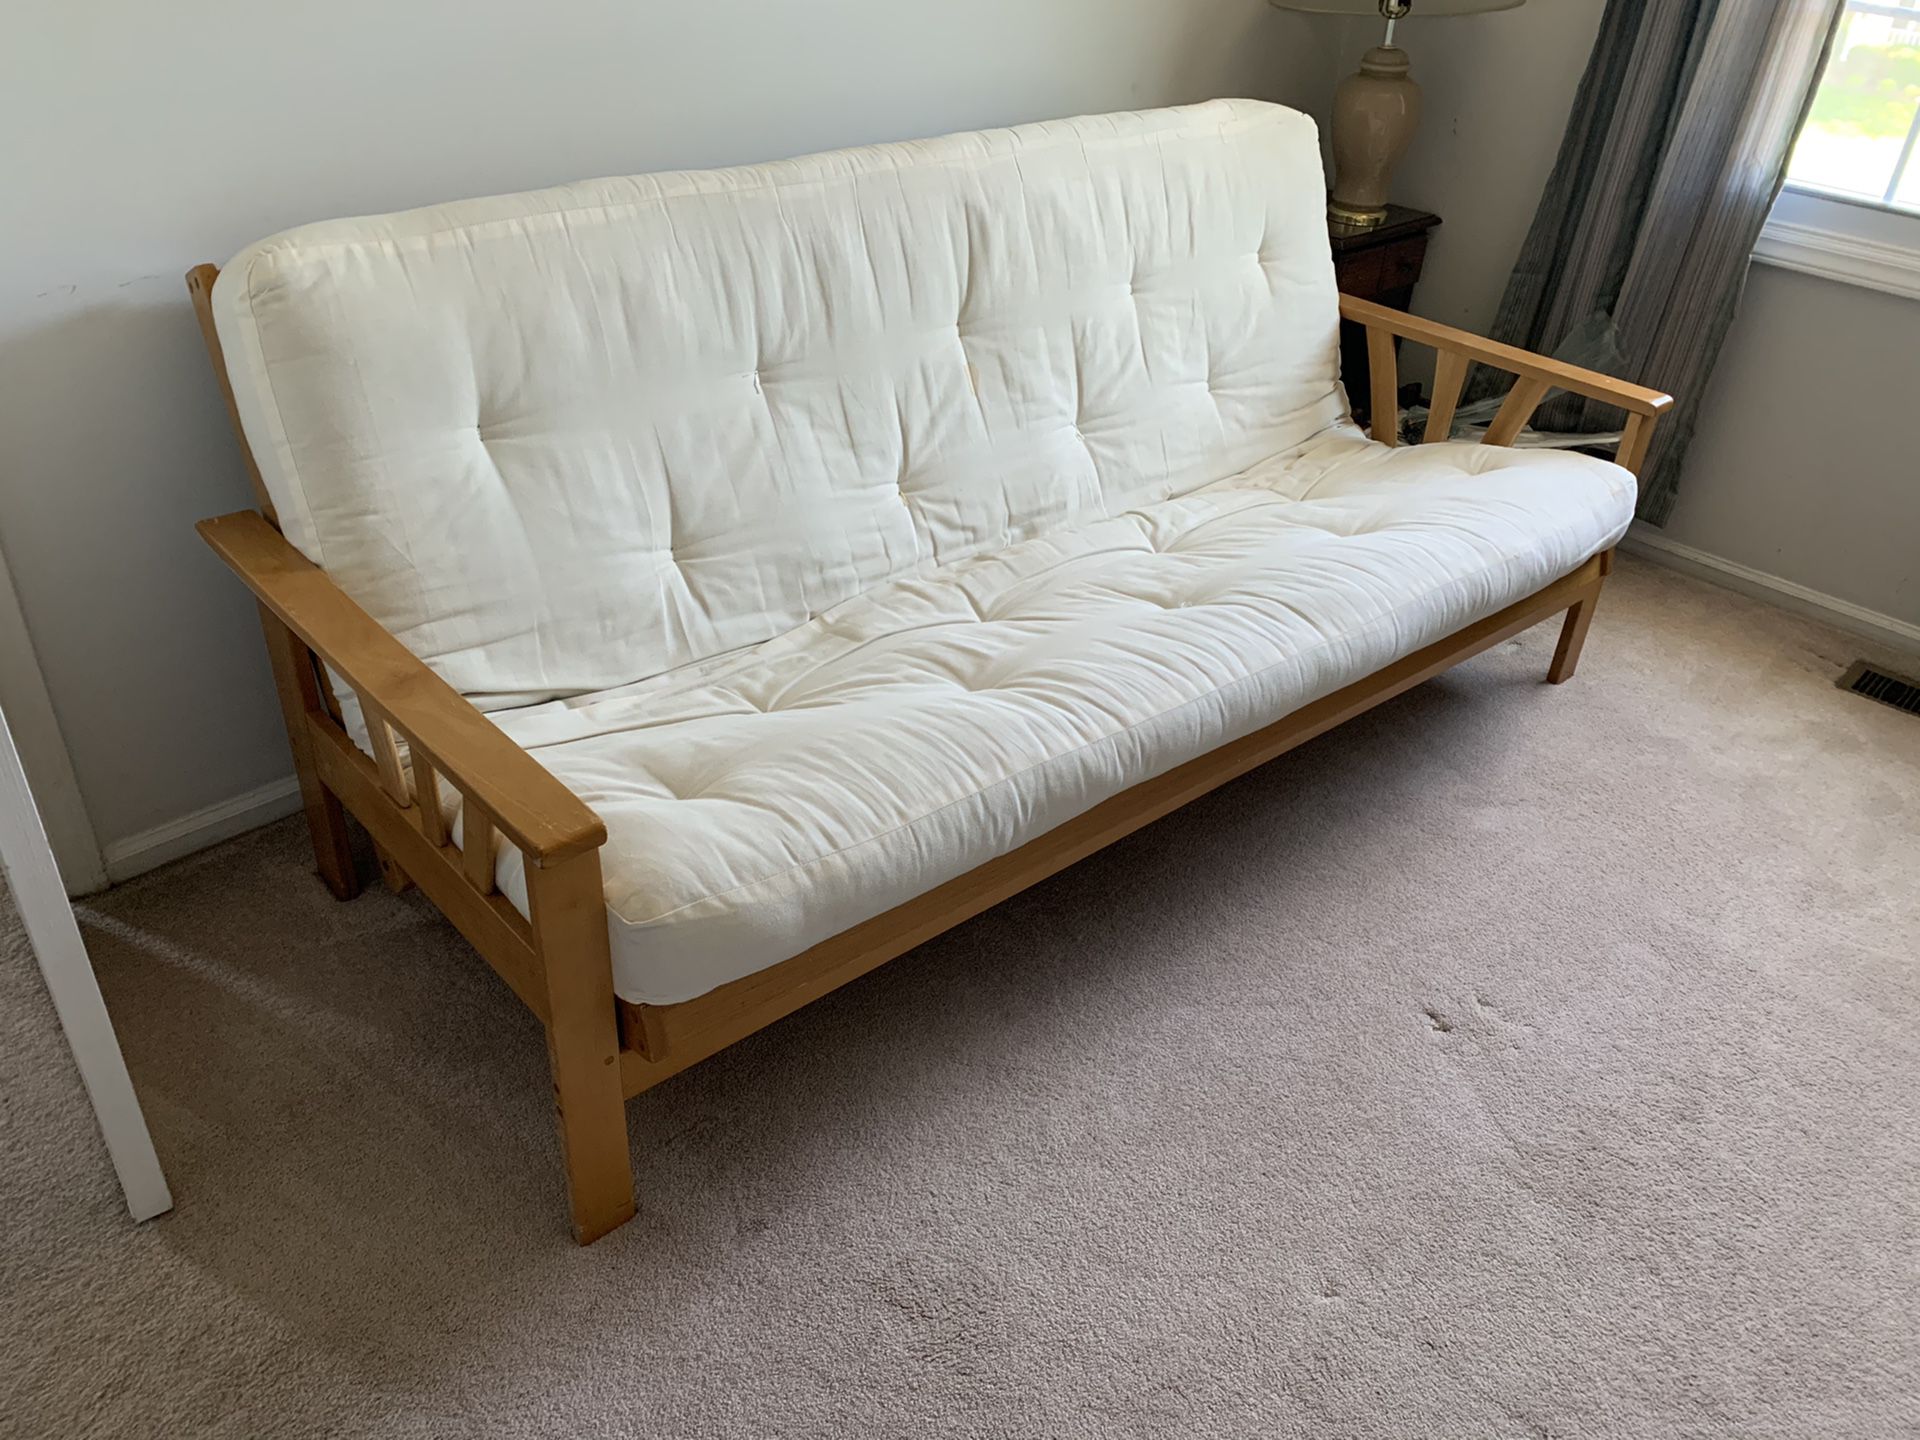 FREE Standard Futon 70” length. About a full size.